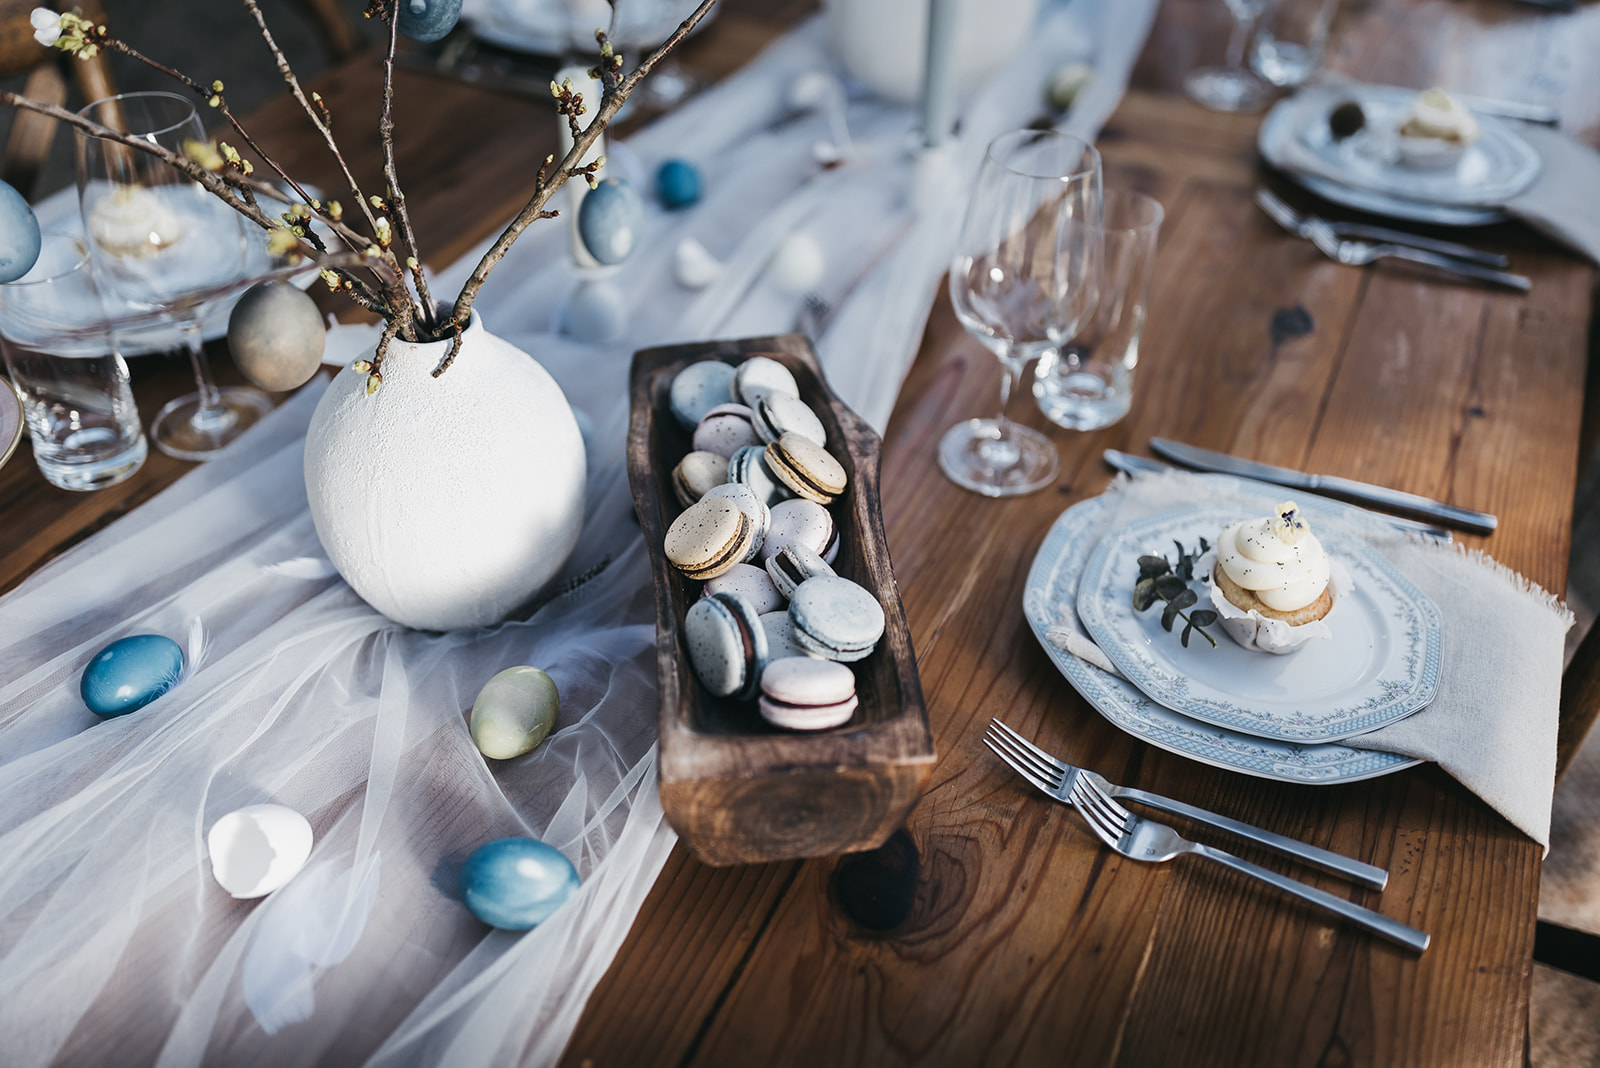 Easter styled Wedding Shoot at Chalet View Lodge with table scapes